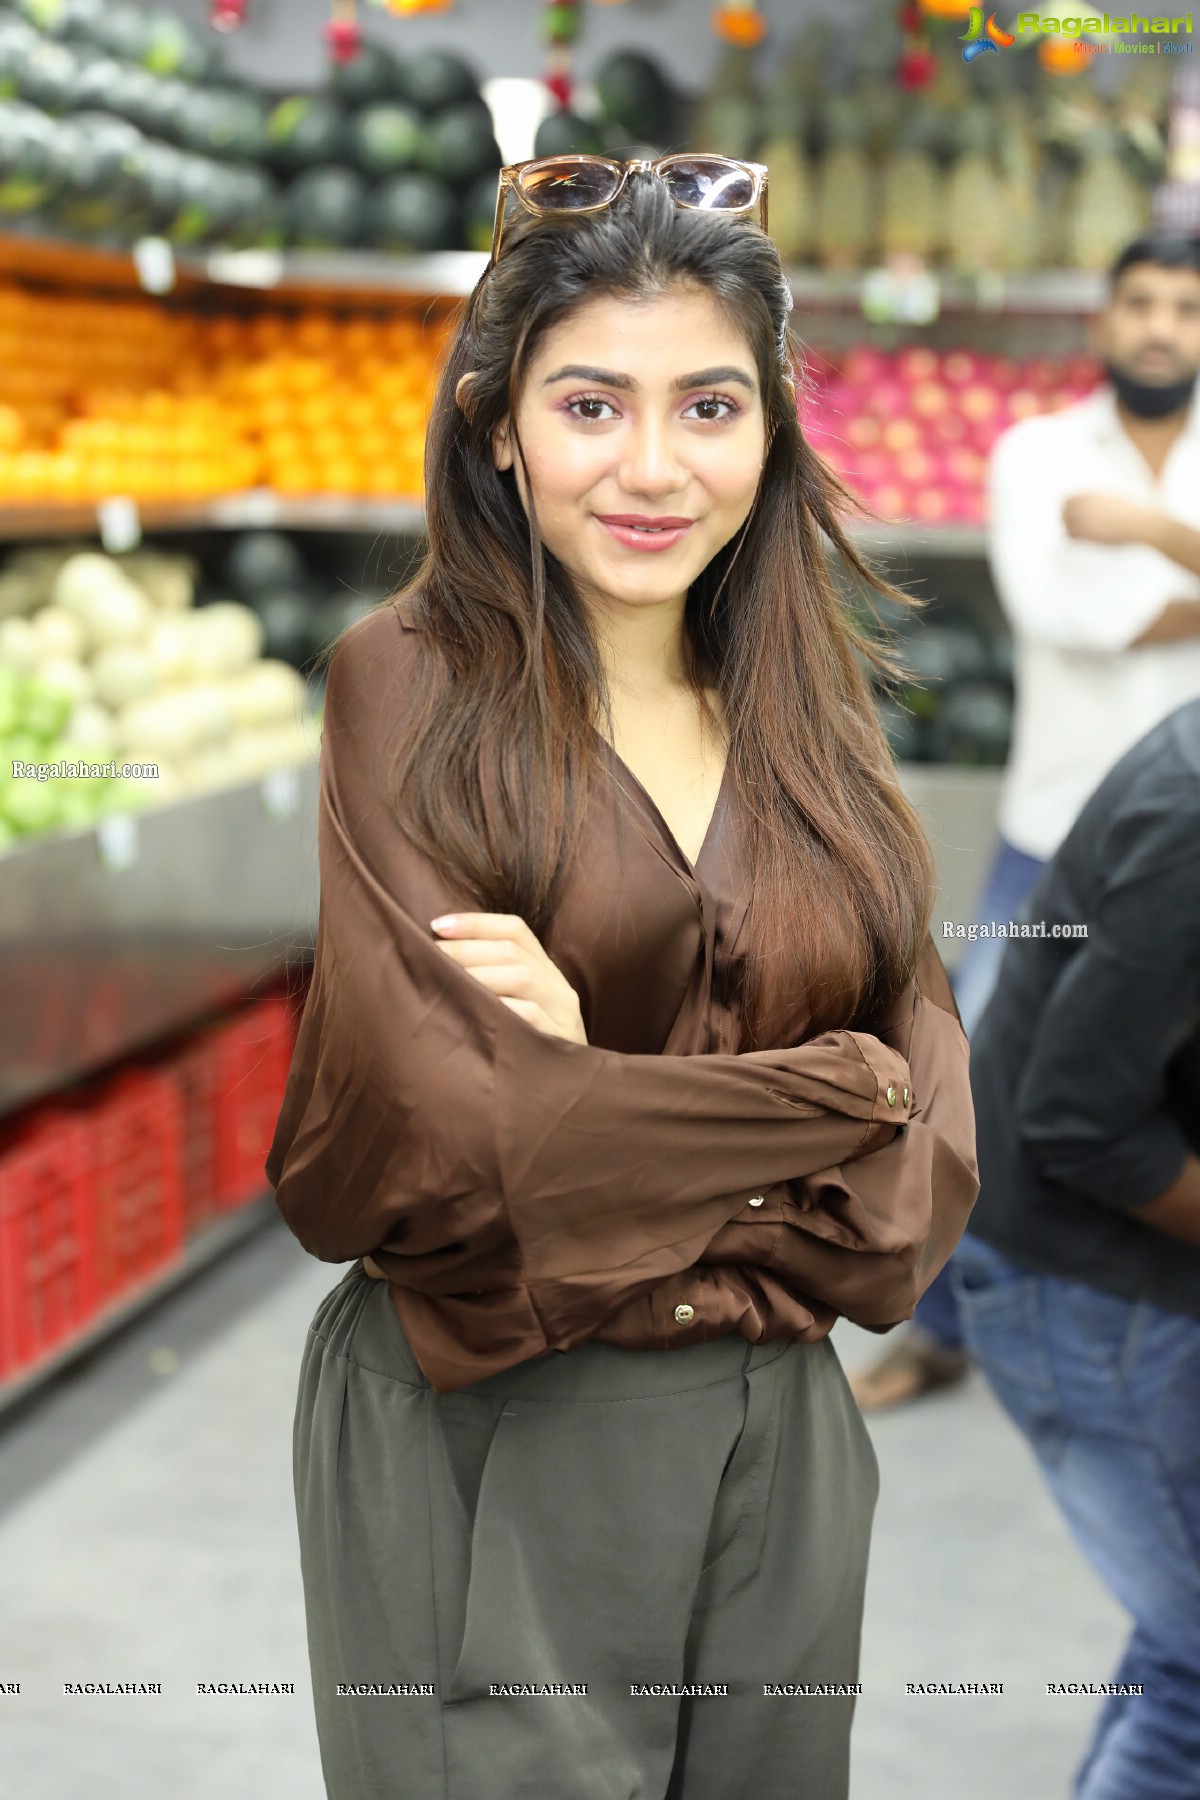 Pure-O-Naturals Fruits and Vegetables 28th Outlet Launch